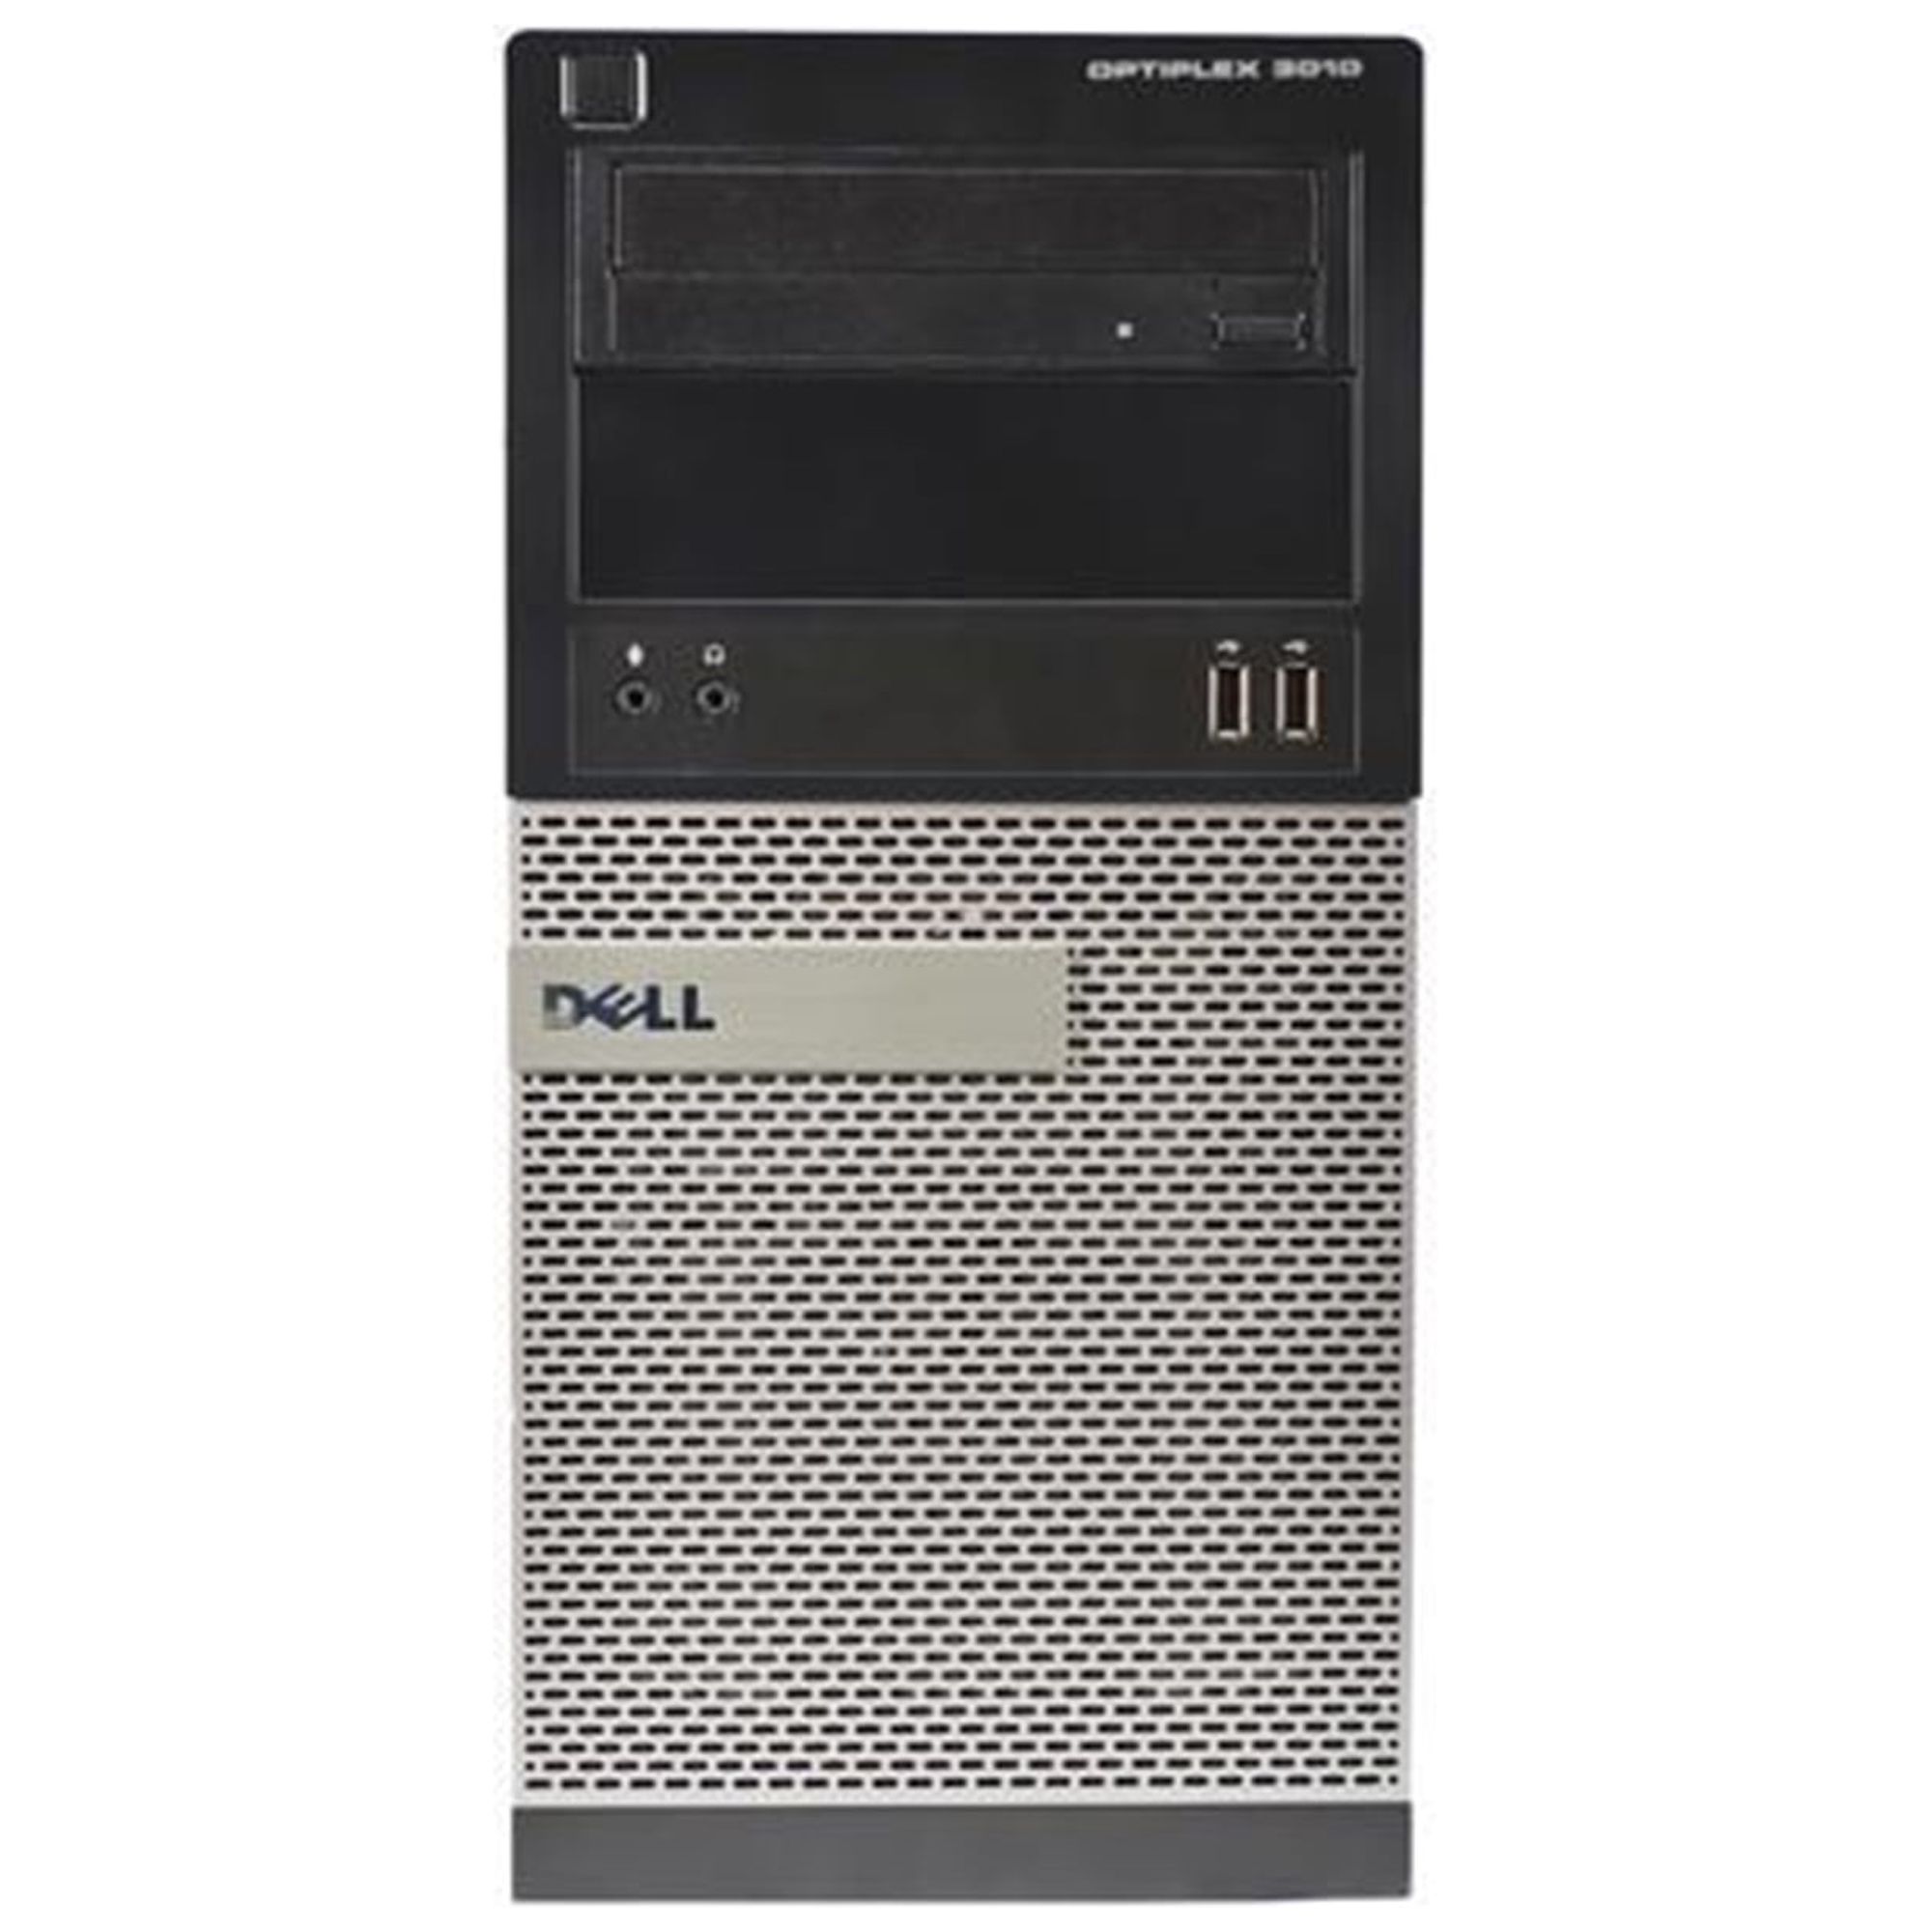 DELL Optiplex 3010 Tower Computer PC, Intel Quad-Core i5, 1TB HDD, 8GB DDR3 RAM, Windows 10 Home, DVD, WIFI, USB Keyboard and Mouse (Used - Like New) - image 1 of 3